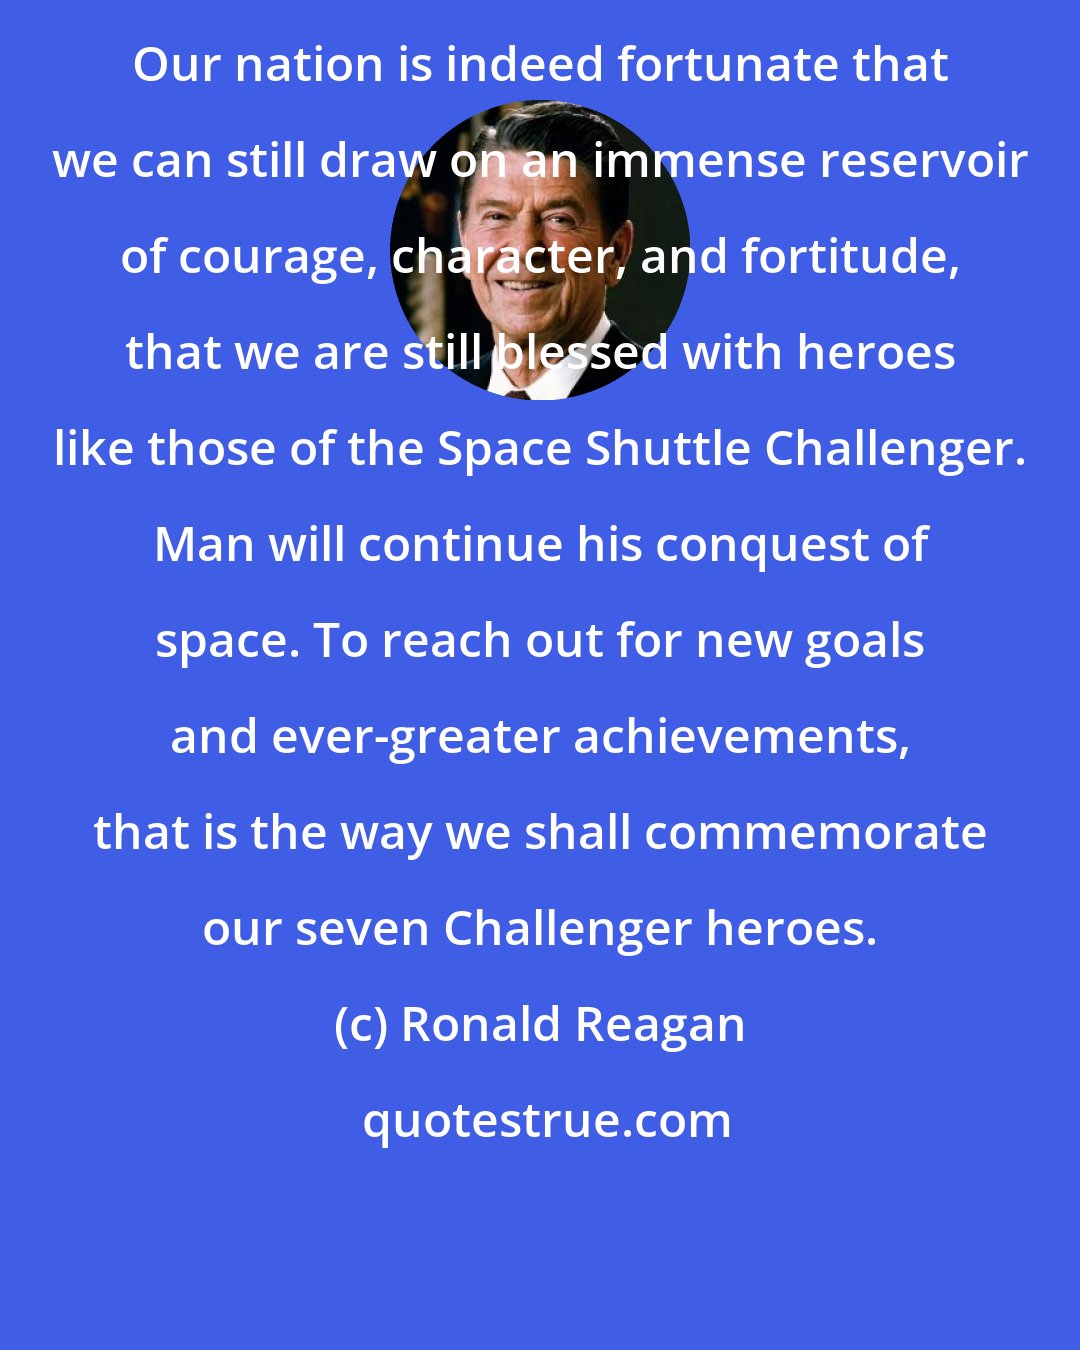 Ronald Reagan: Our nation is indeed fortunate that we can still draw on an immense reservoir of courage, character, and fortitude, that we are still blessed with heroes like those of the Space Shuttle Challenger. Man will continue his conquest of space. To reach out for new goals and ever-greater achievements, that is the way we shall commemorate our seven Challenger heroes.